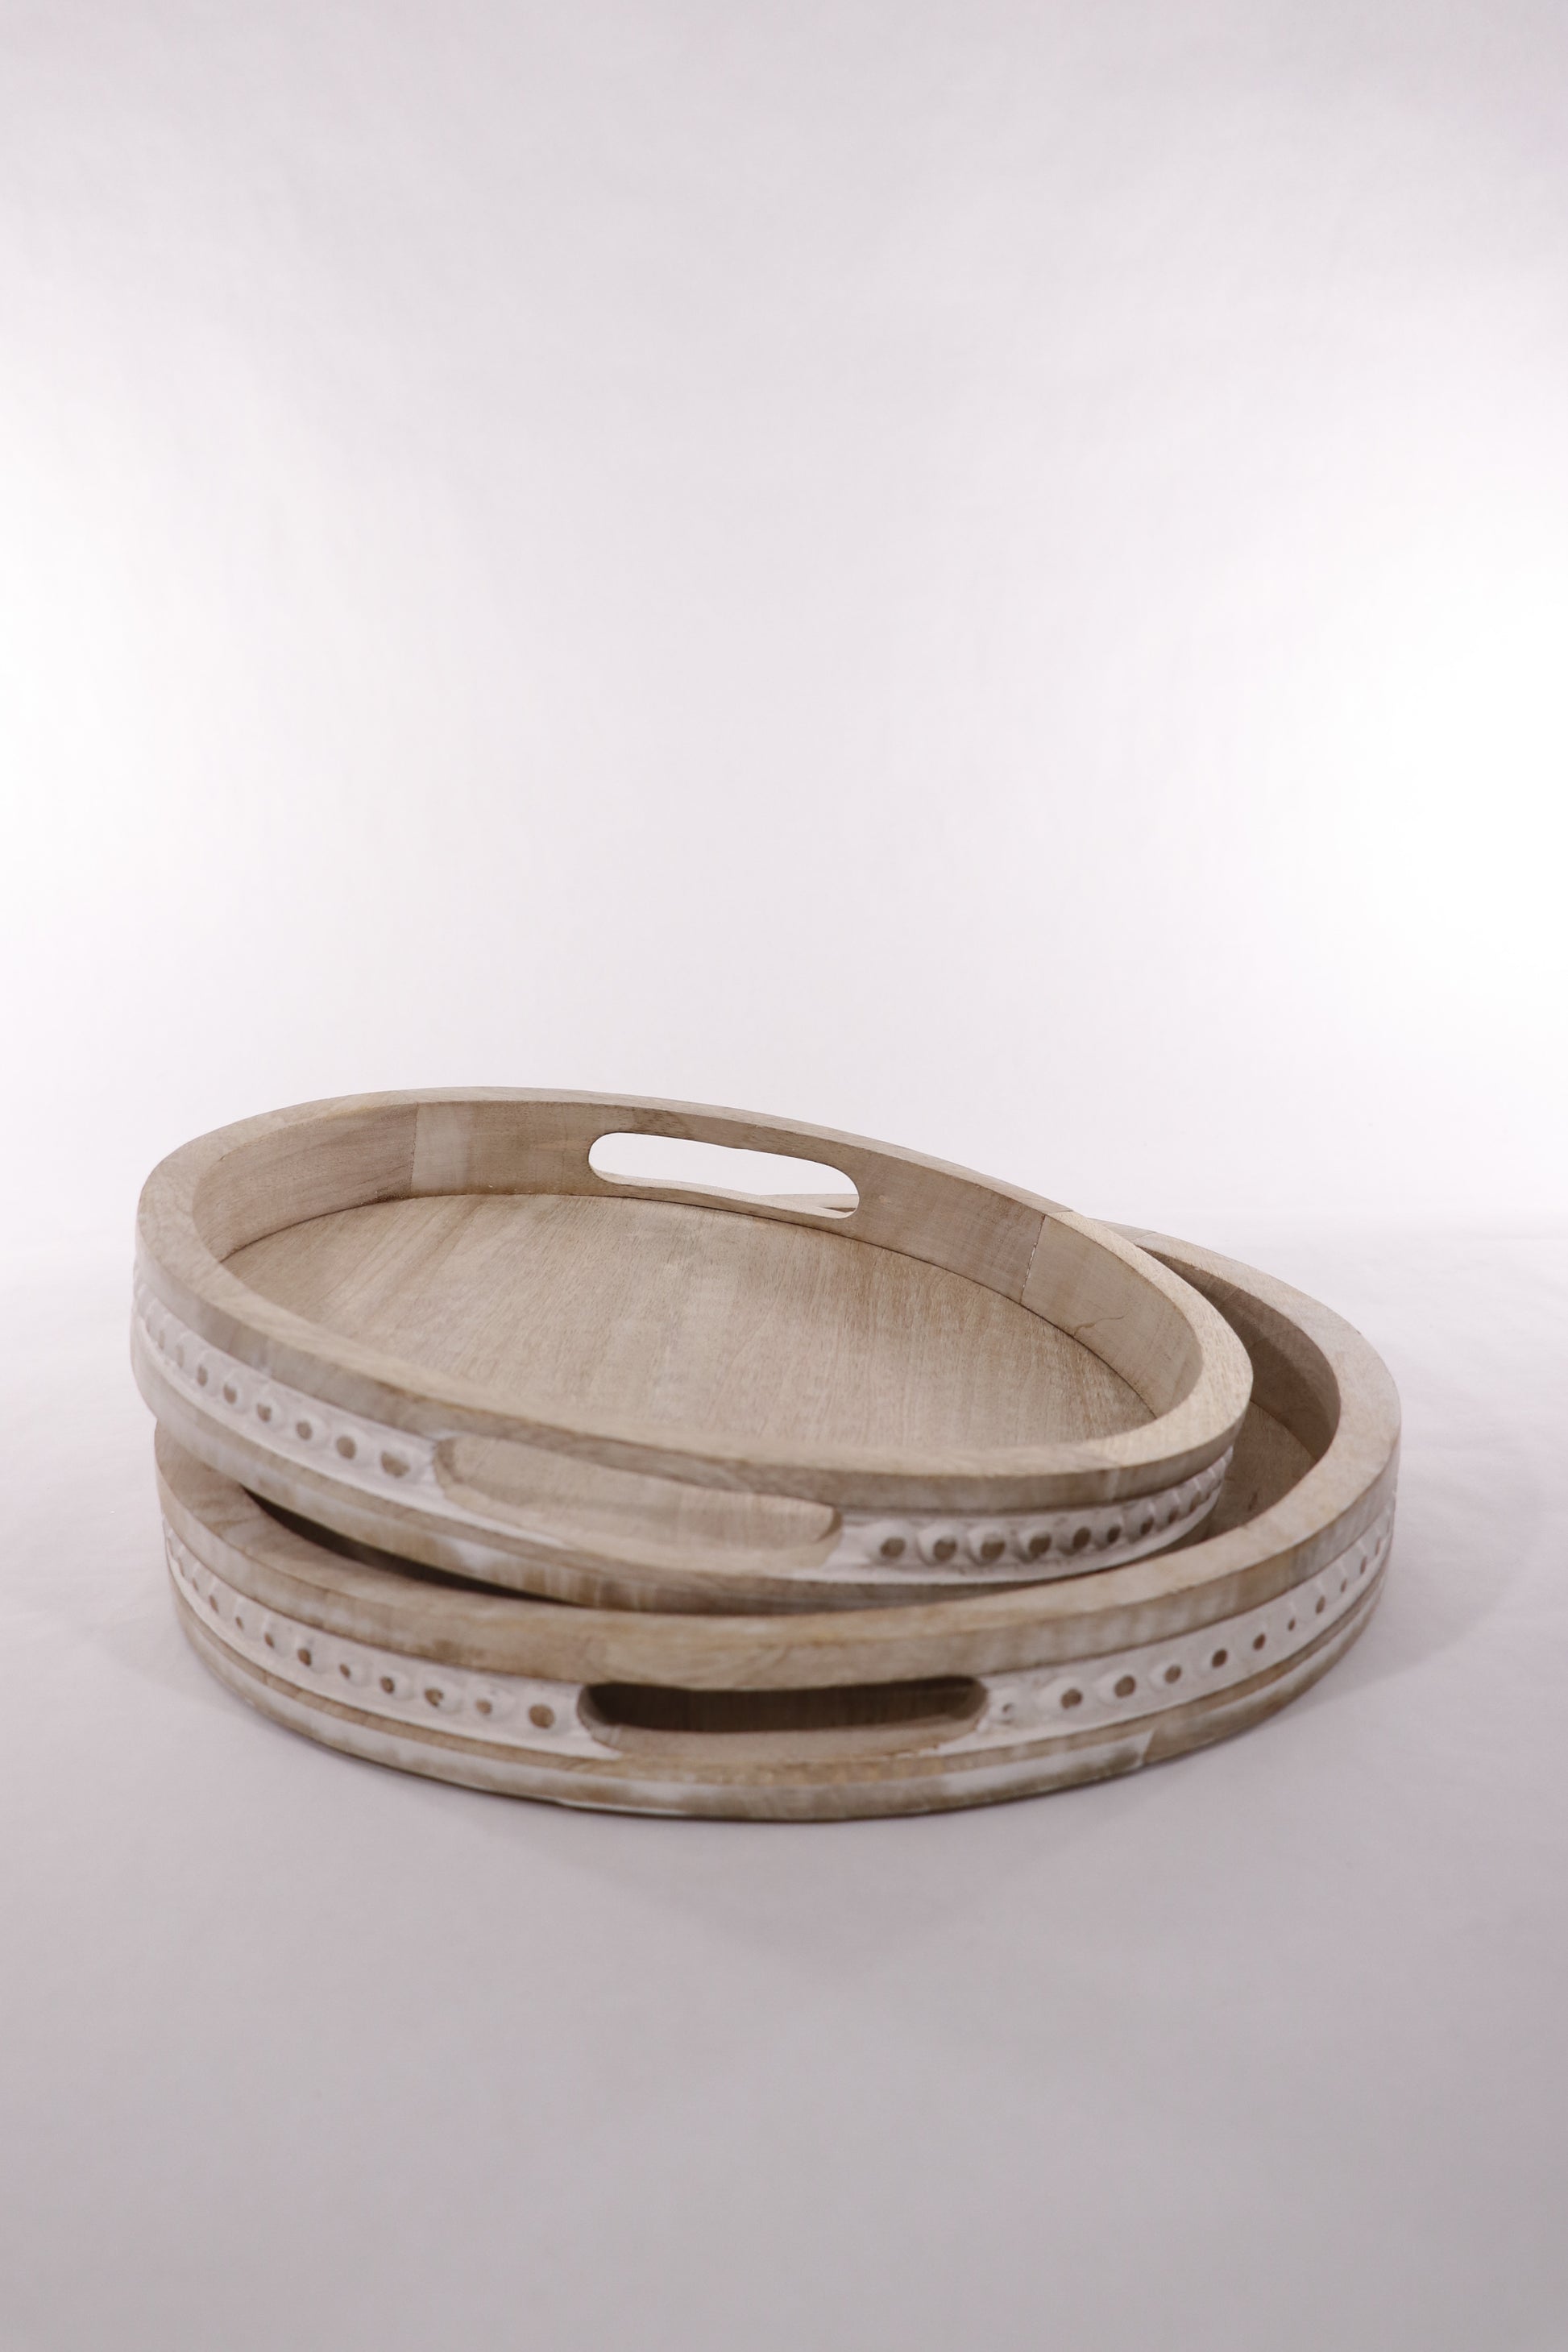 Round wood trays with handles